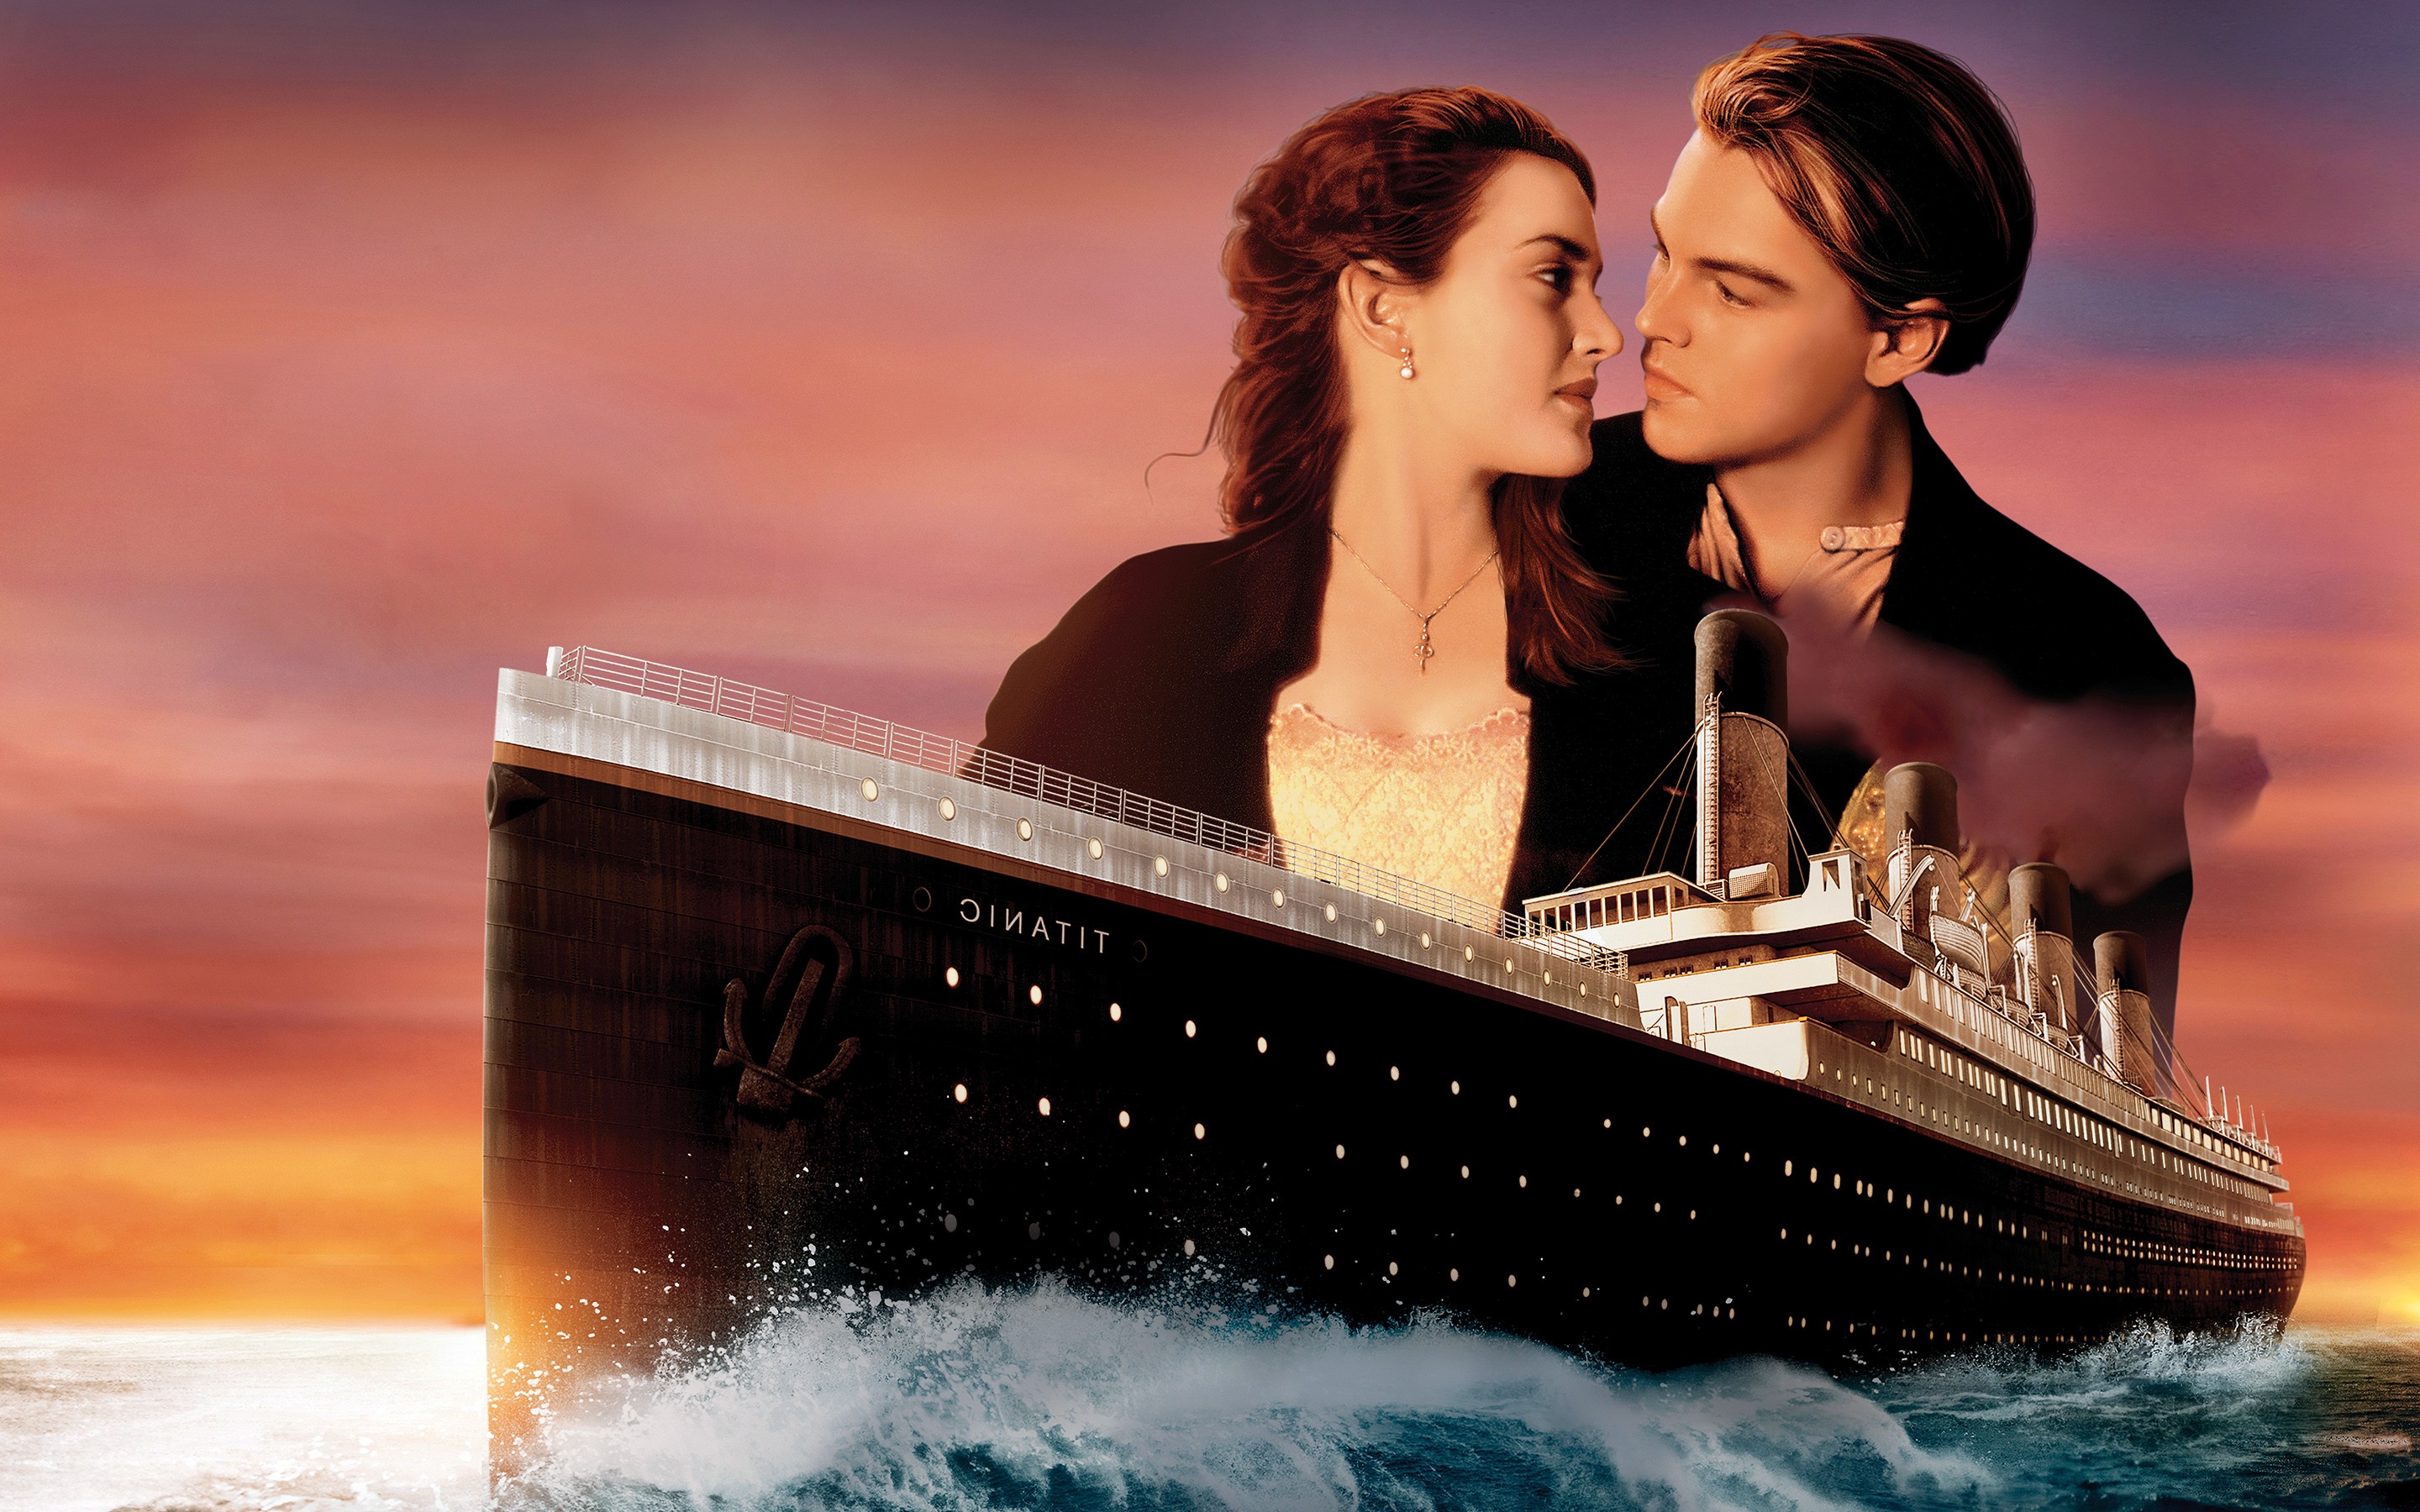 Titanic Movie Full HD, HD Movies, 4k Wallpapers, Images, Backgrounds